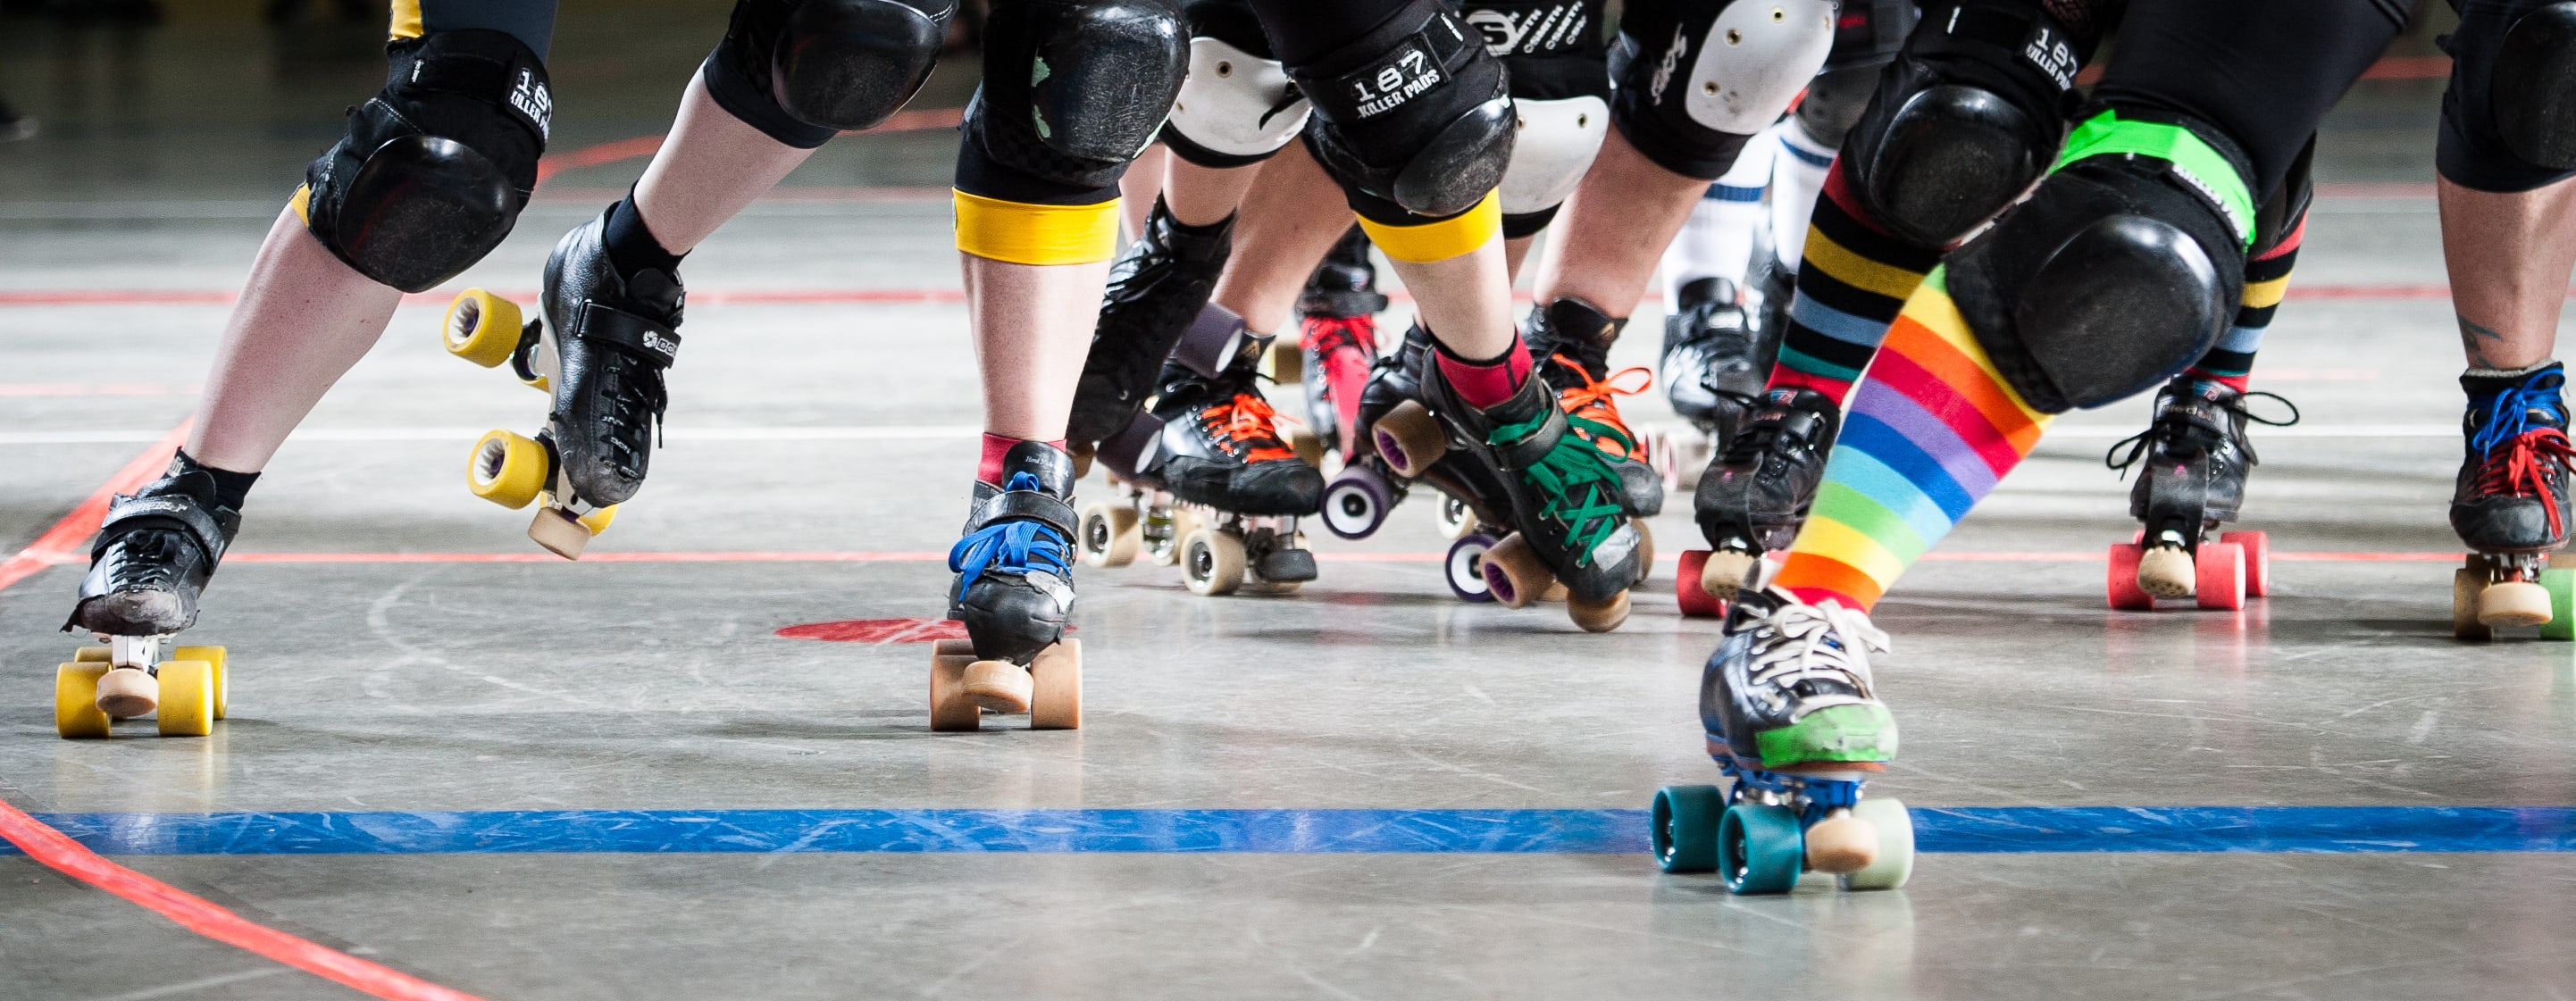 Roller derby players on the track